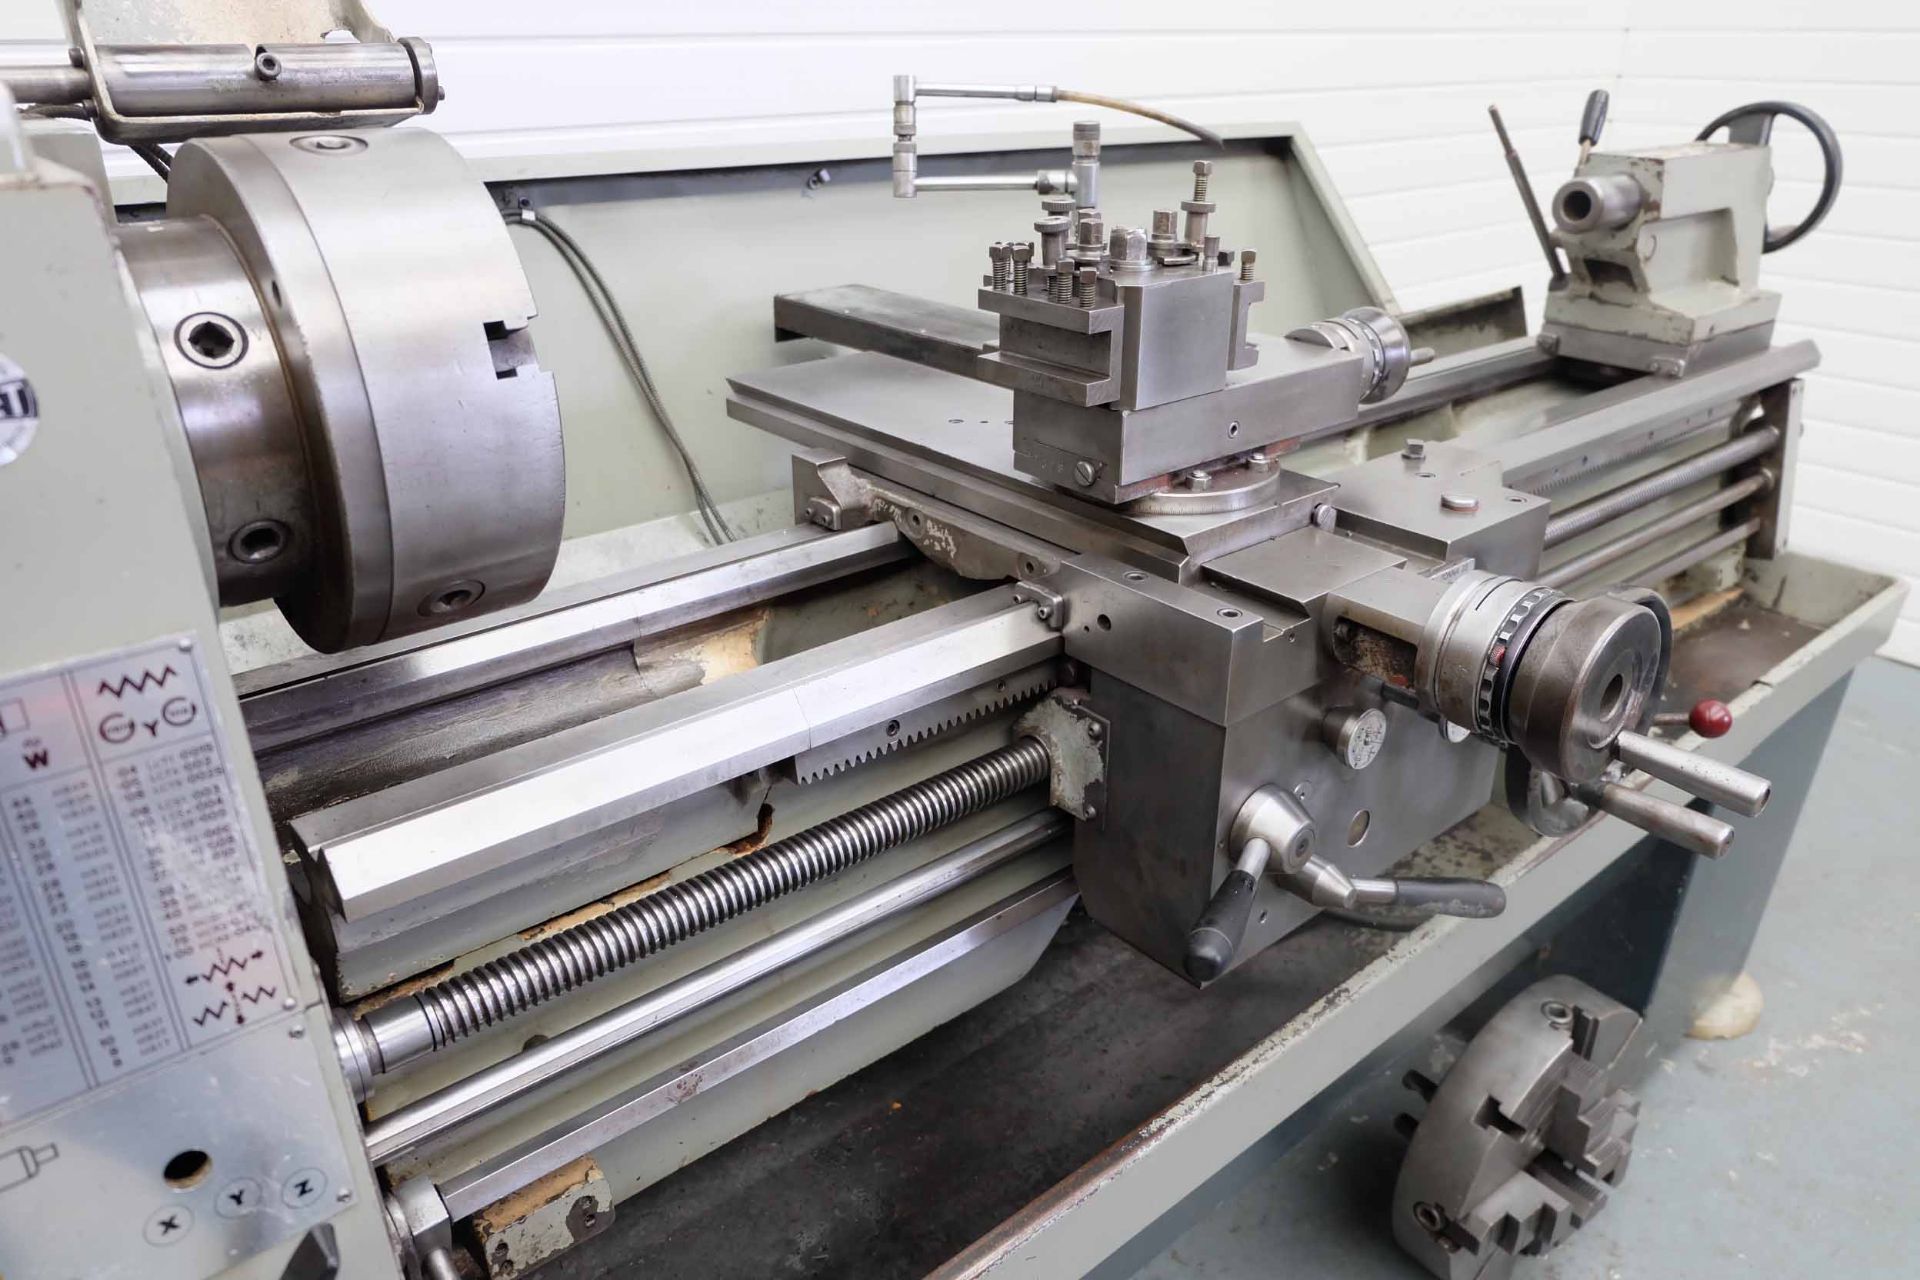 Colchester Triumph 2000 Gap Bed Centre Lathe. Admits Between Centres 50". Swing Over Bed 15 1/4". Sw - Image 6 of 10